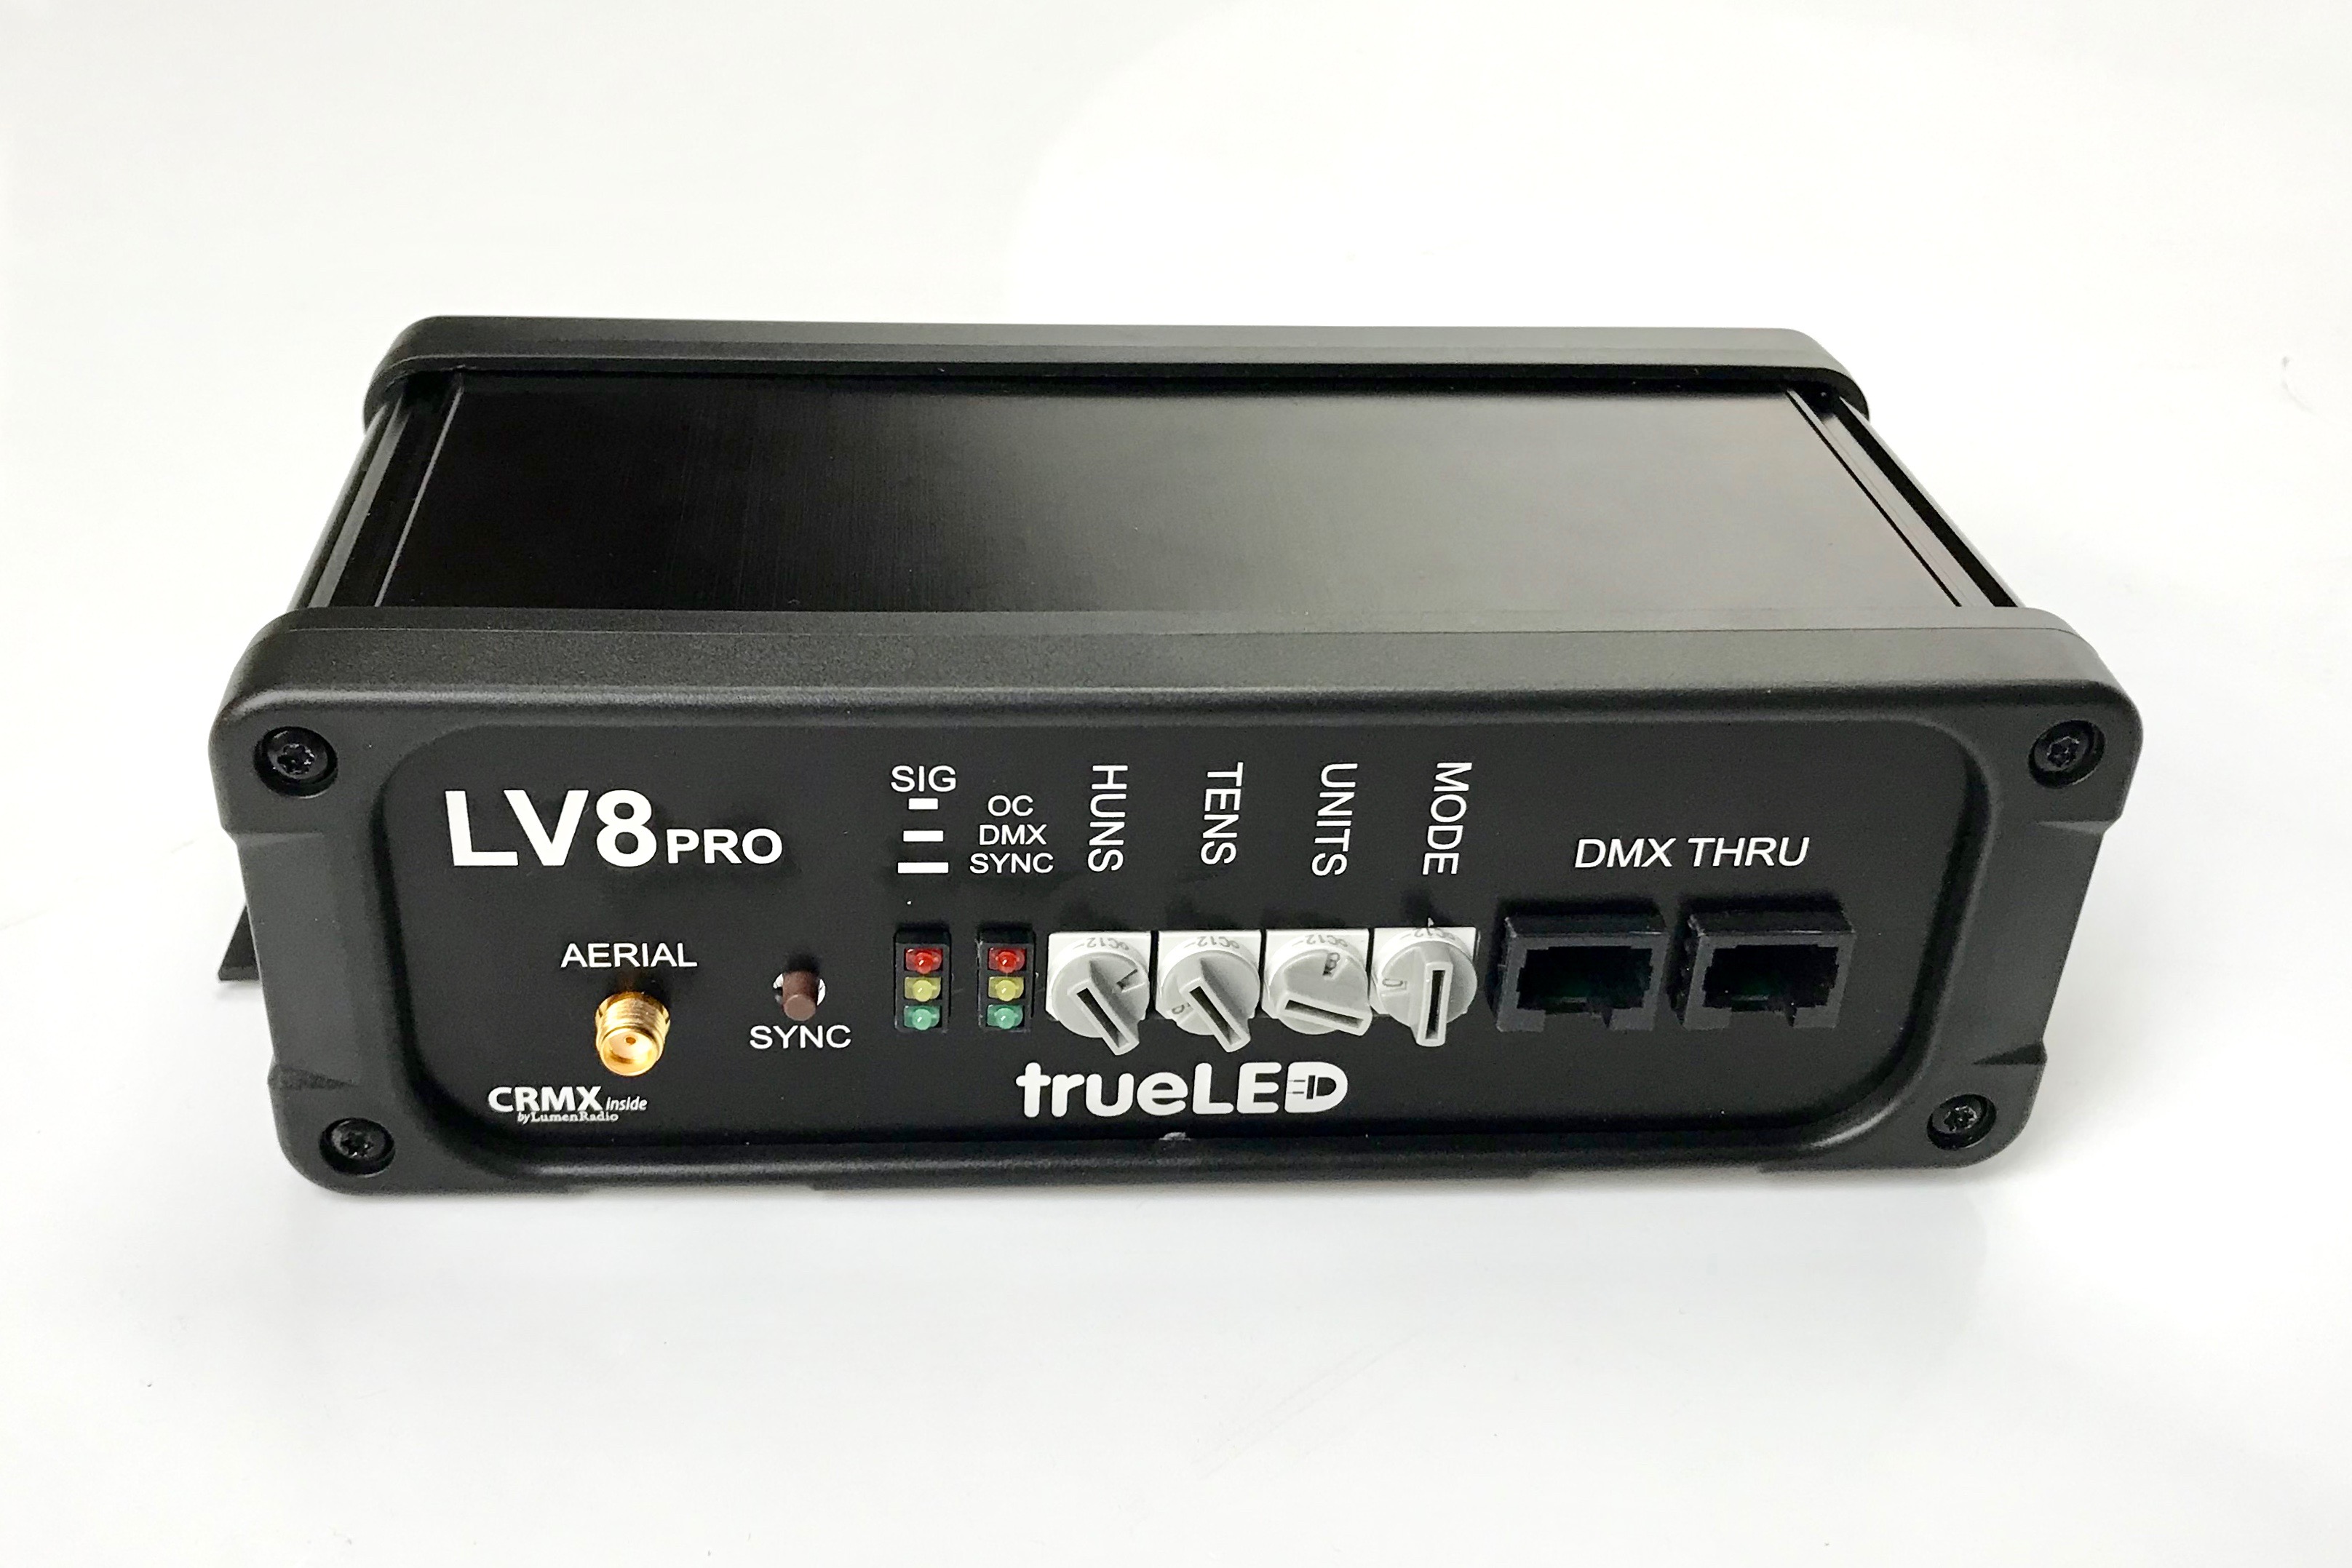 LV8 Pro - 8 channel radio embedded LED controller